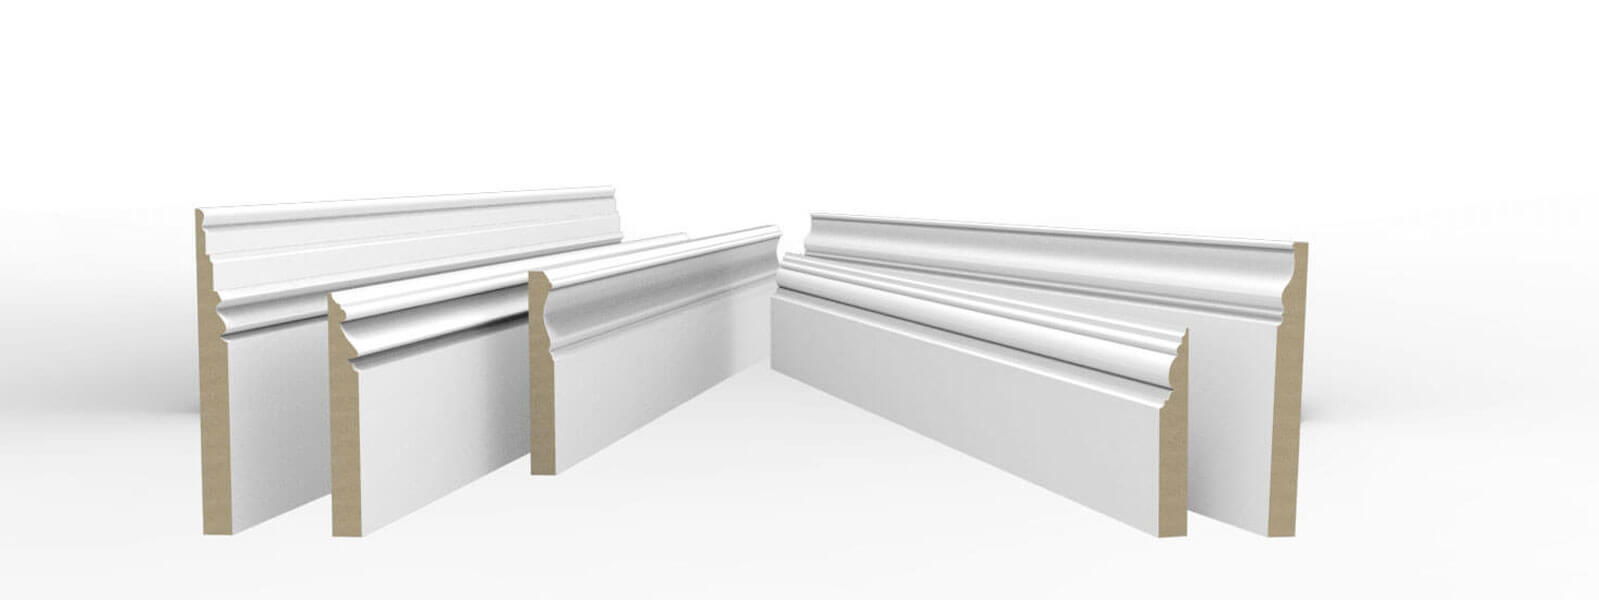 Cover Skirting Boards Manufacturer in China -Myfull Decor